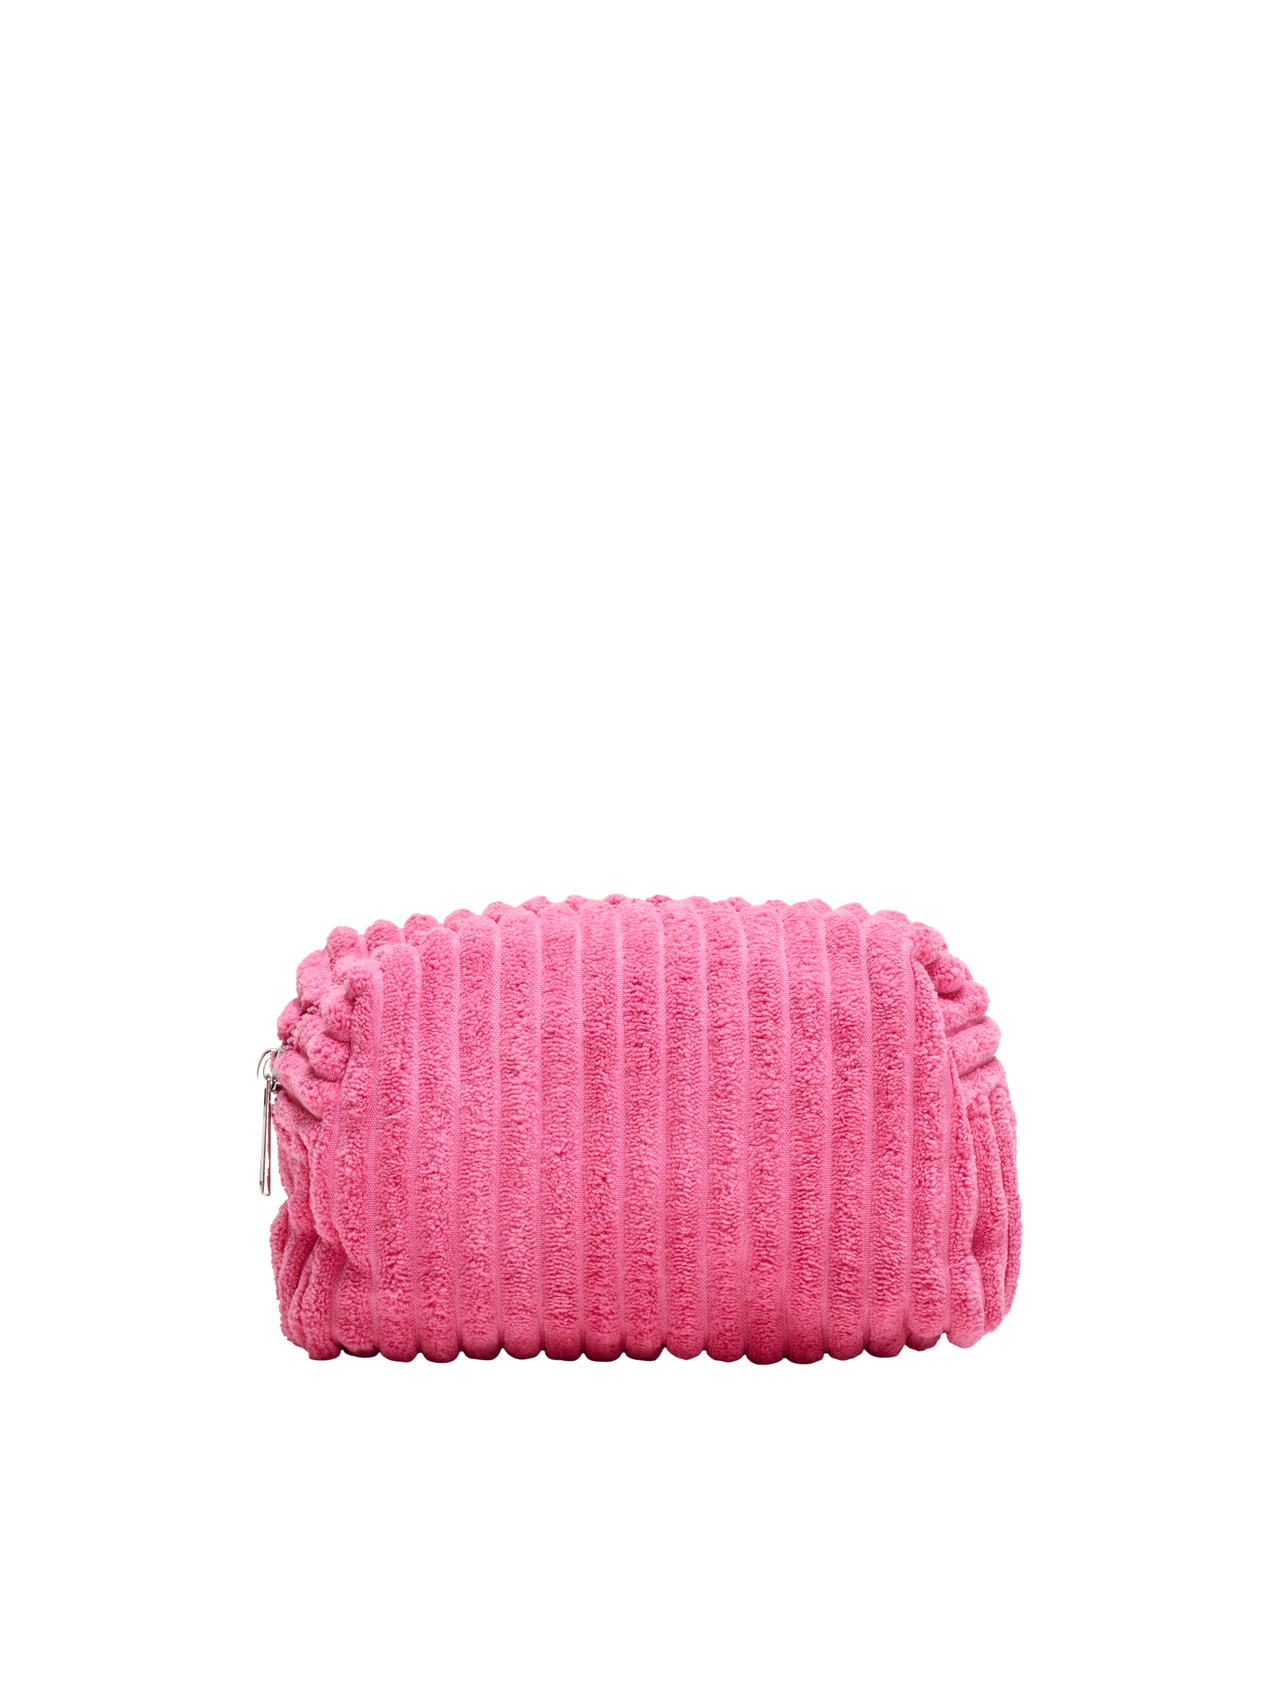 ONLY Small corduroy bag -Knockout Pink - 15313252